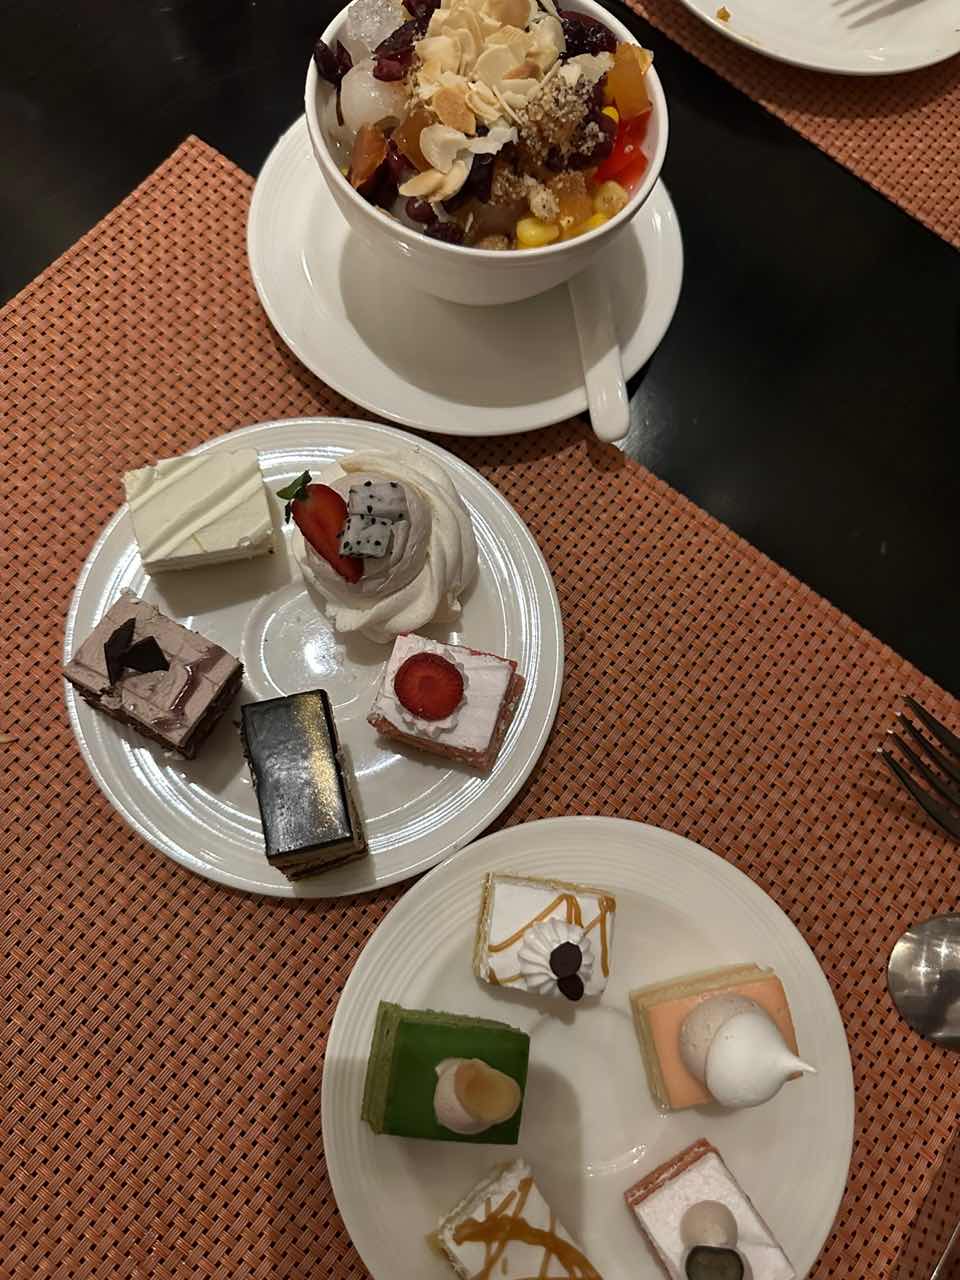 Desserts in a plate along with ais kacang